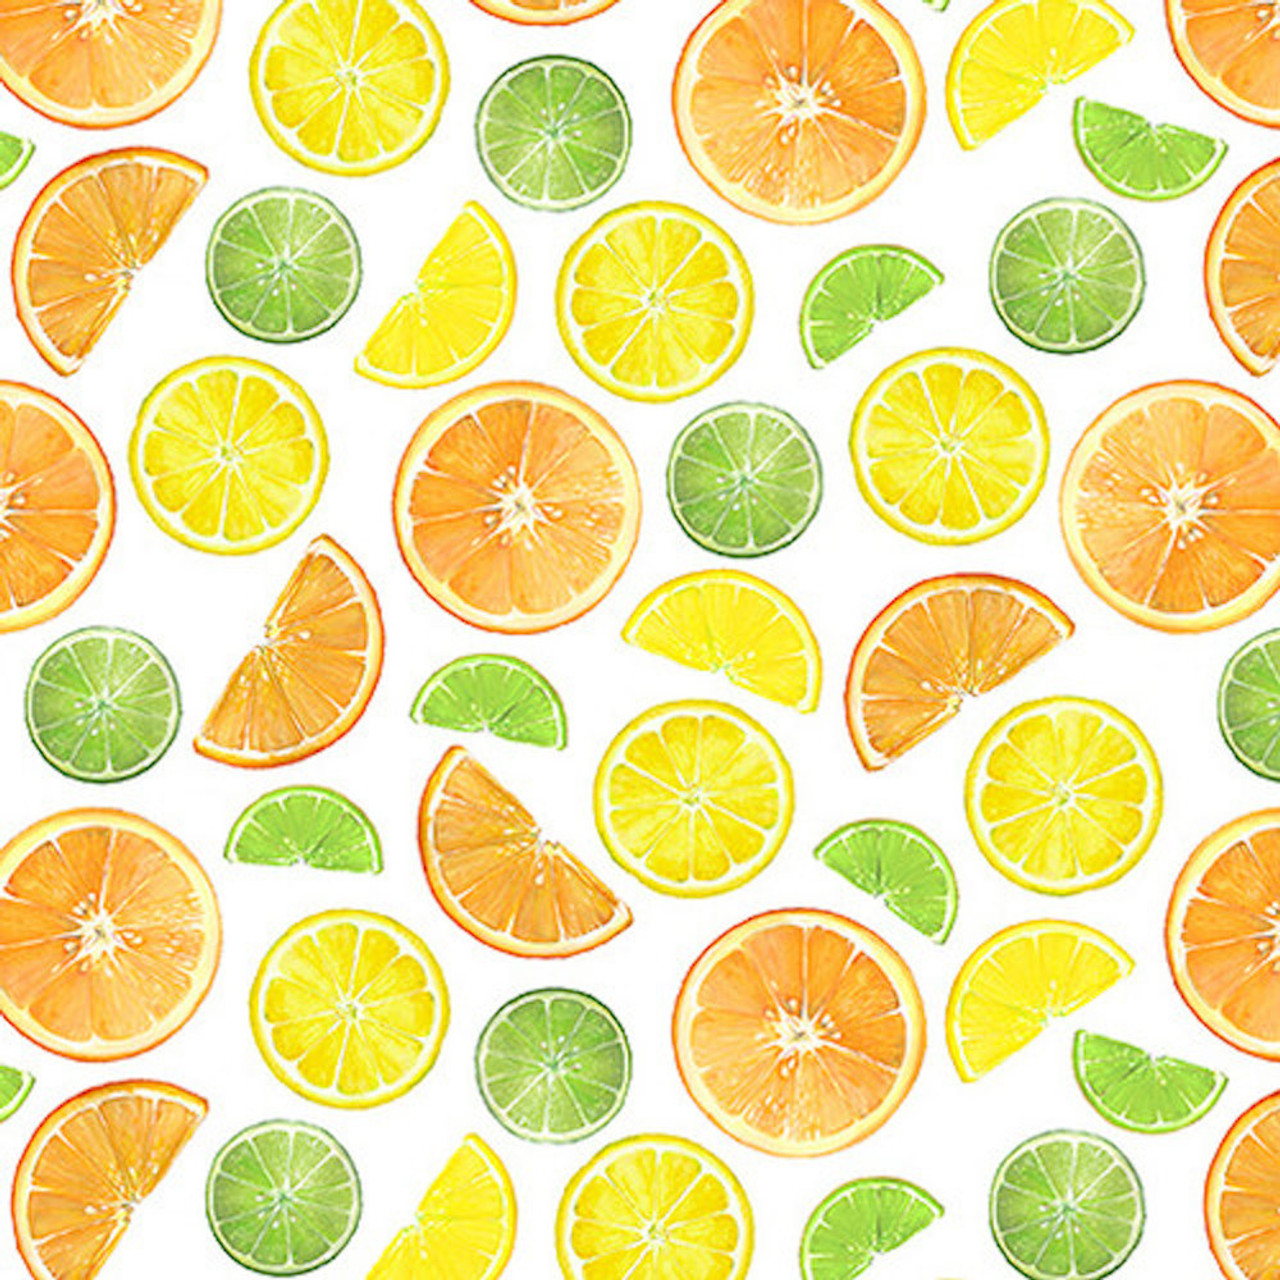 Blank Quilting Fruit For Thought Fruit Slices White Cotton Fabric By The Yard